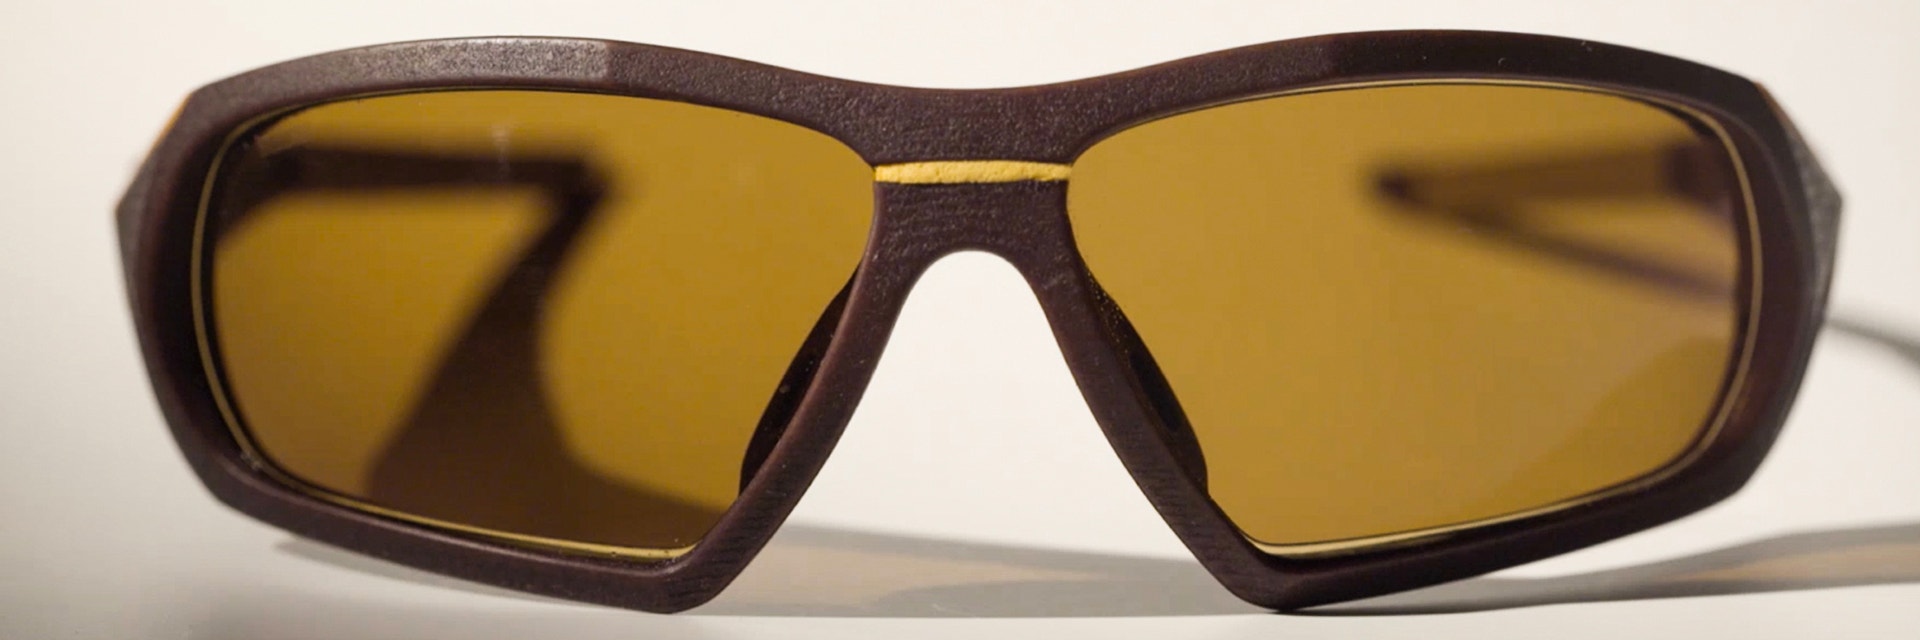 Pair of SEIKO Xchanger 3D-printed sports glasses with brown frame, yellow accents, and smoke-tinted lenses, seen from front 